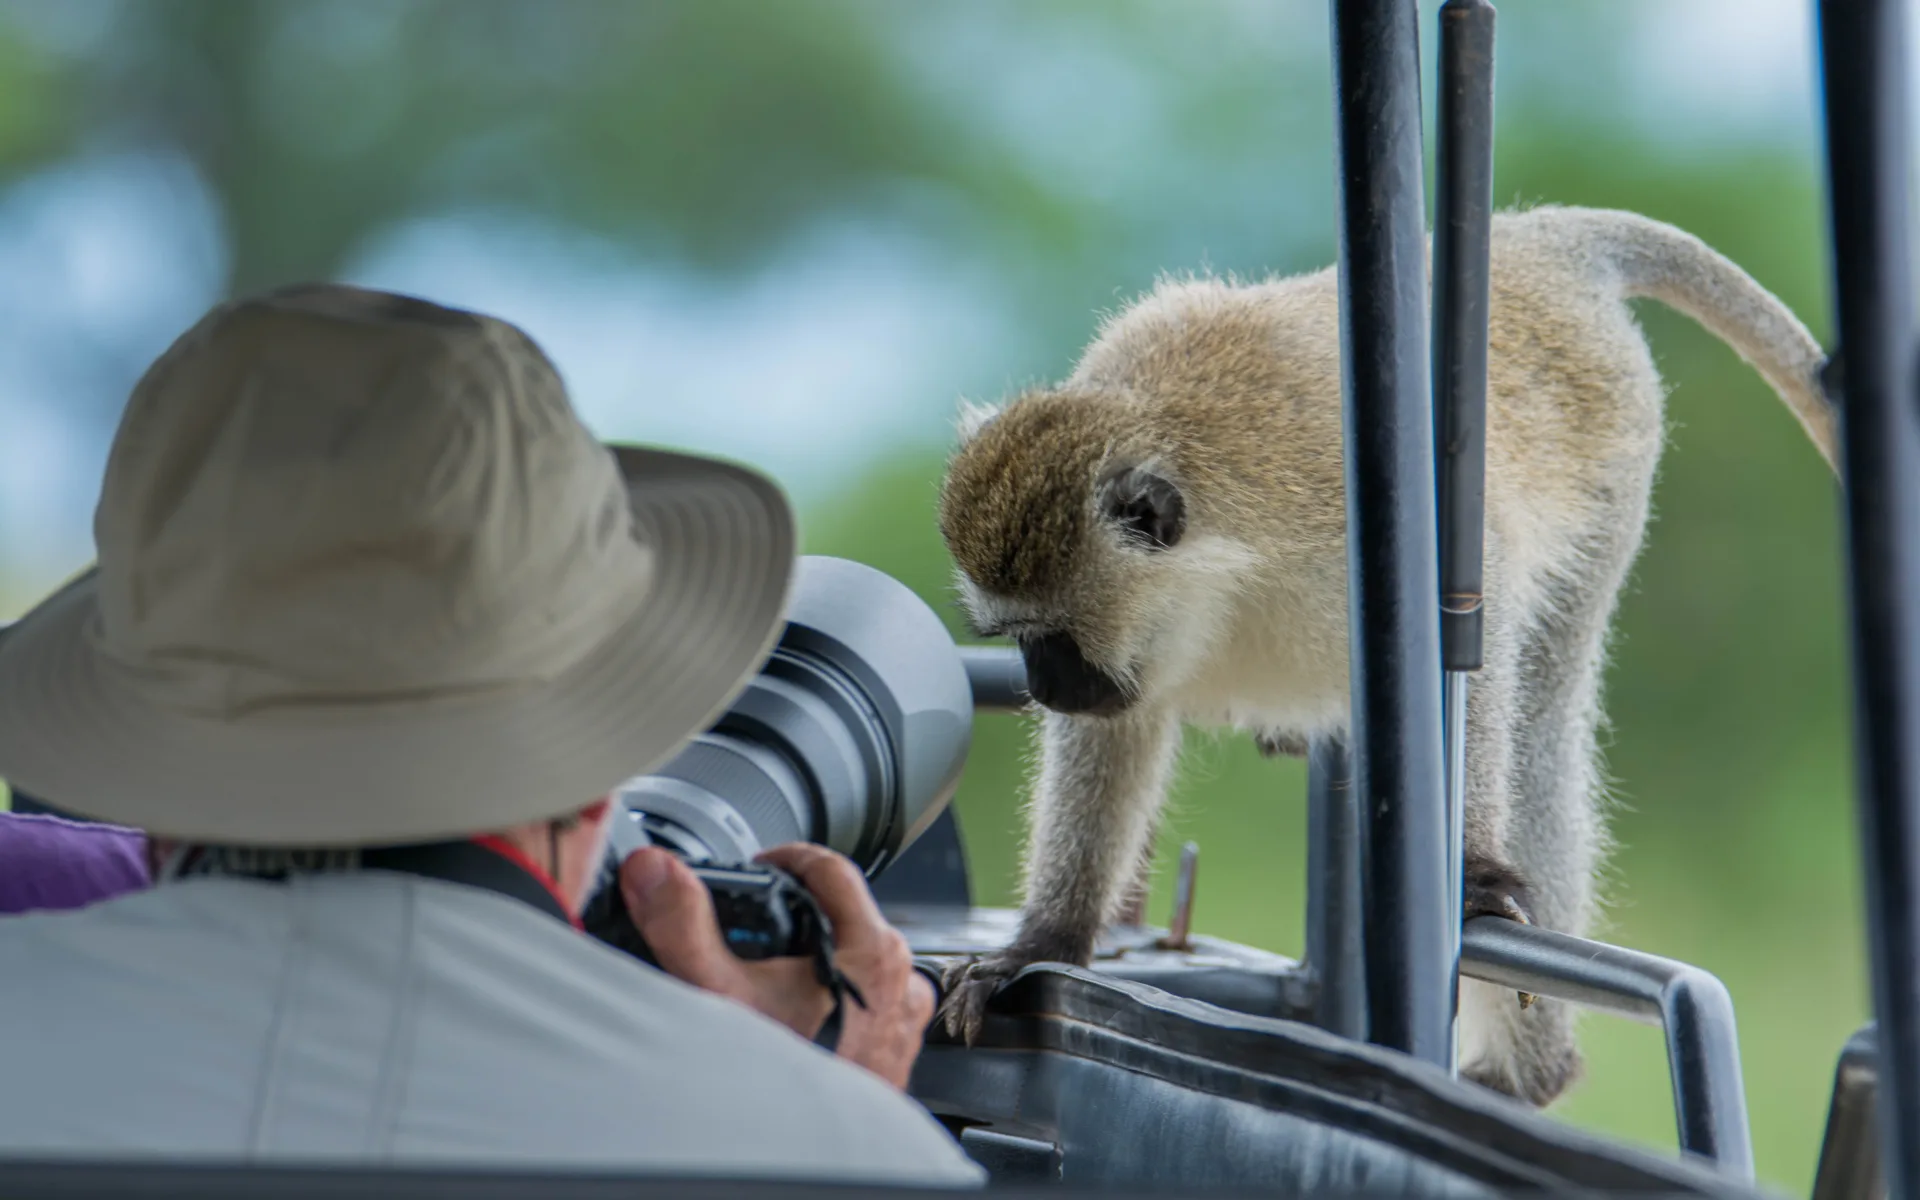 A safari traveller is taking an up-close picture of a small, furry monkey.